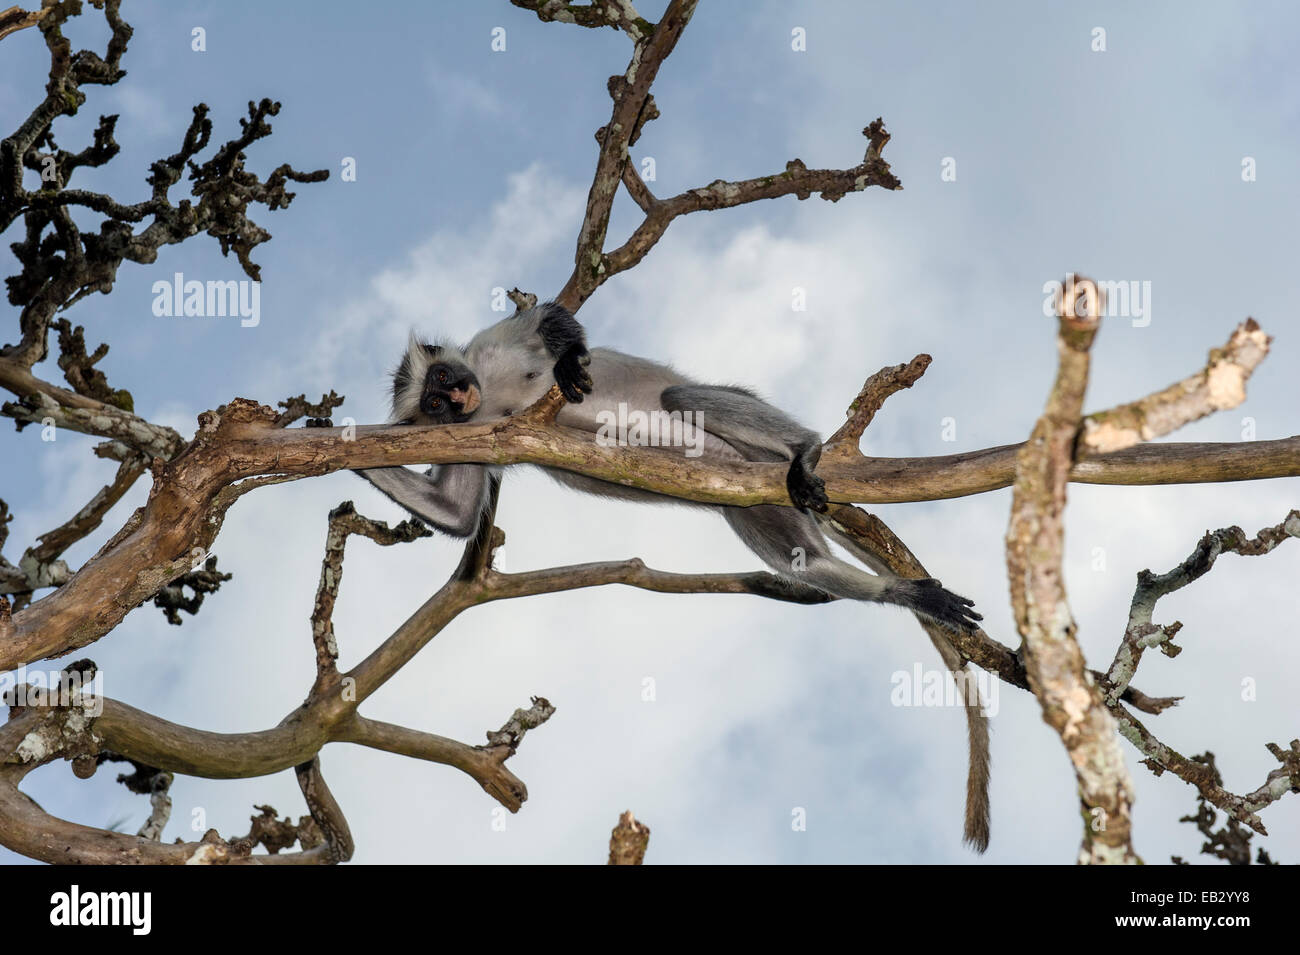 A Zanzibar Red Colobus sleeping in tree denuded by over-browsing. Stock Photo